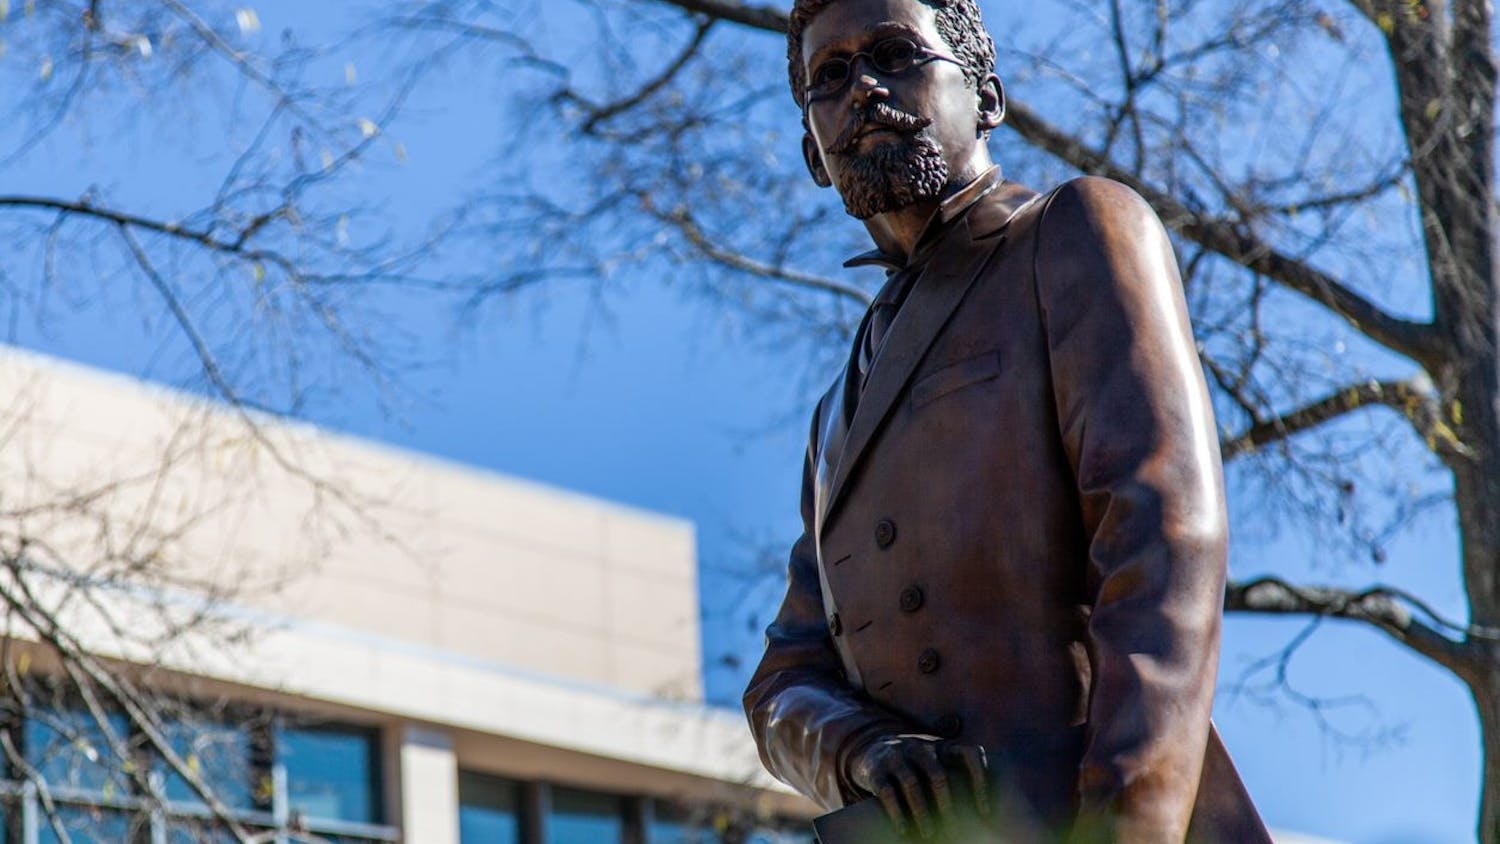 The Richard T. Greener statue in front of the Thomas Cooper Library on January 18, 2022 in Columbia, SC. Greener was the first African American professor at the University of South Carolina.